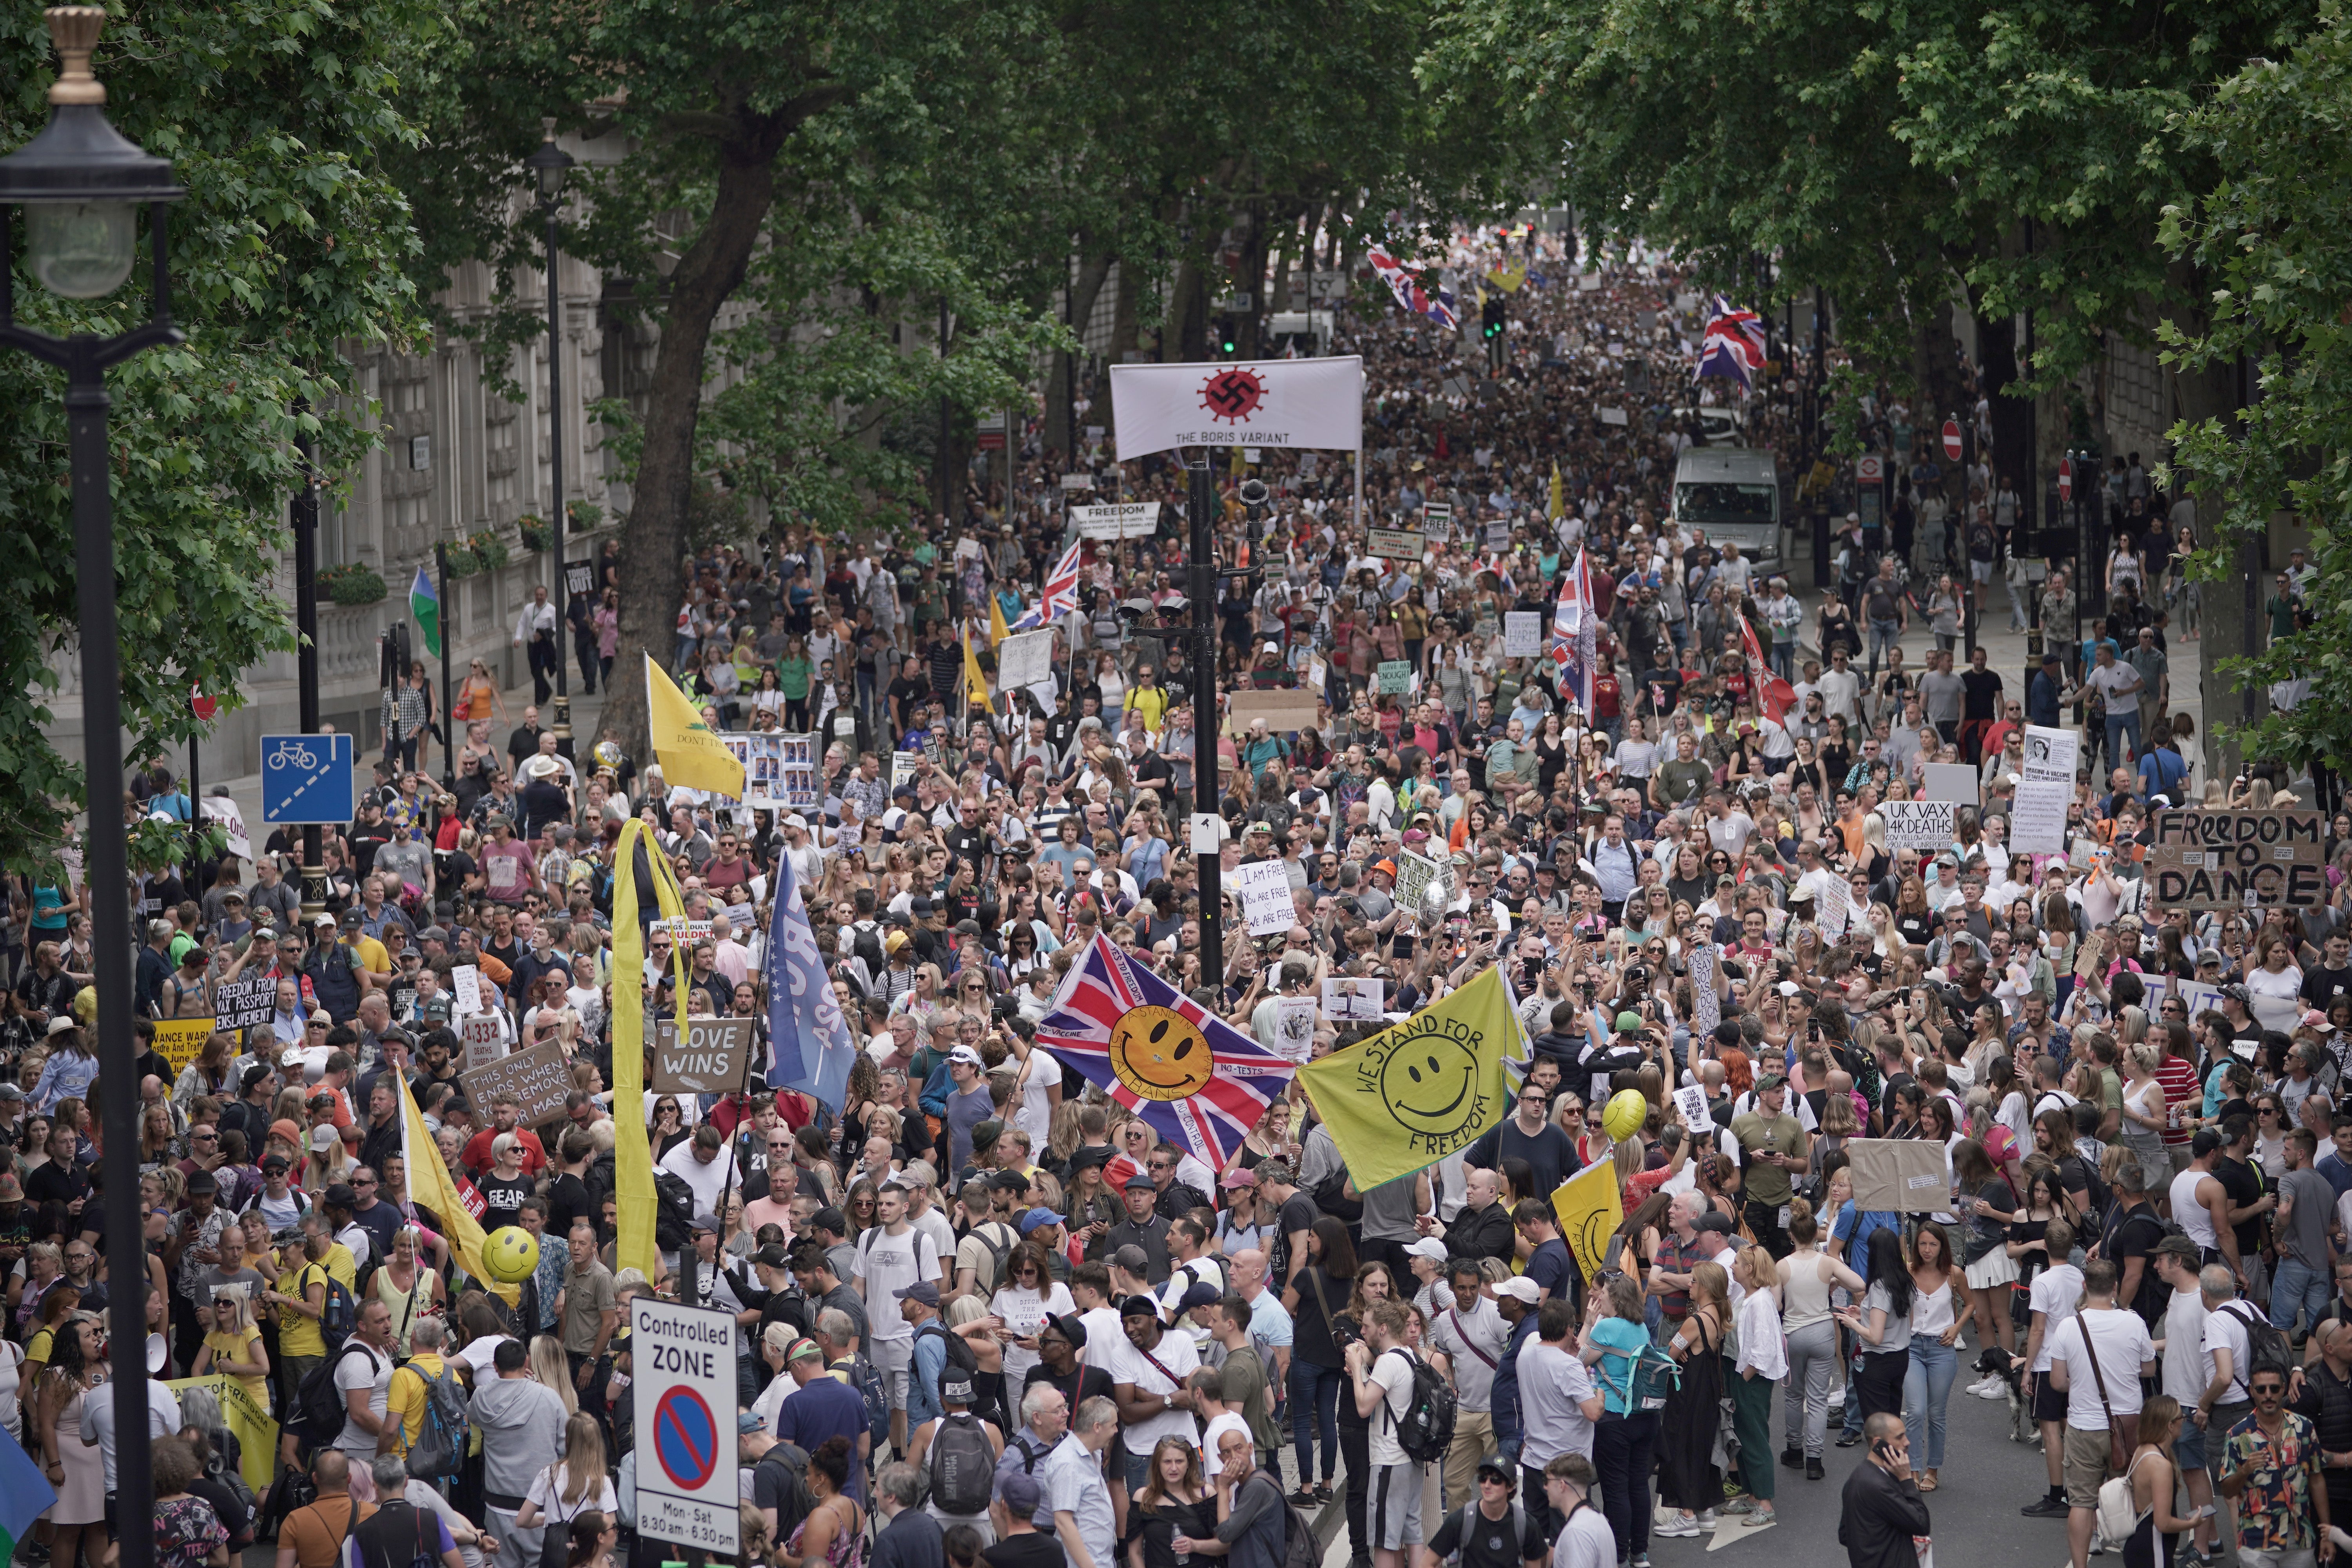 An anti-lockdown protest in London in June 2021 (Aaron Chown/PA)